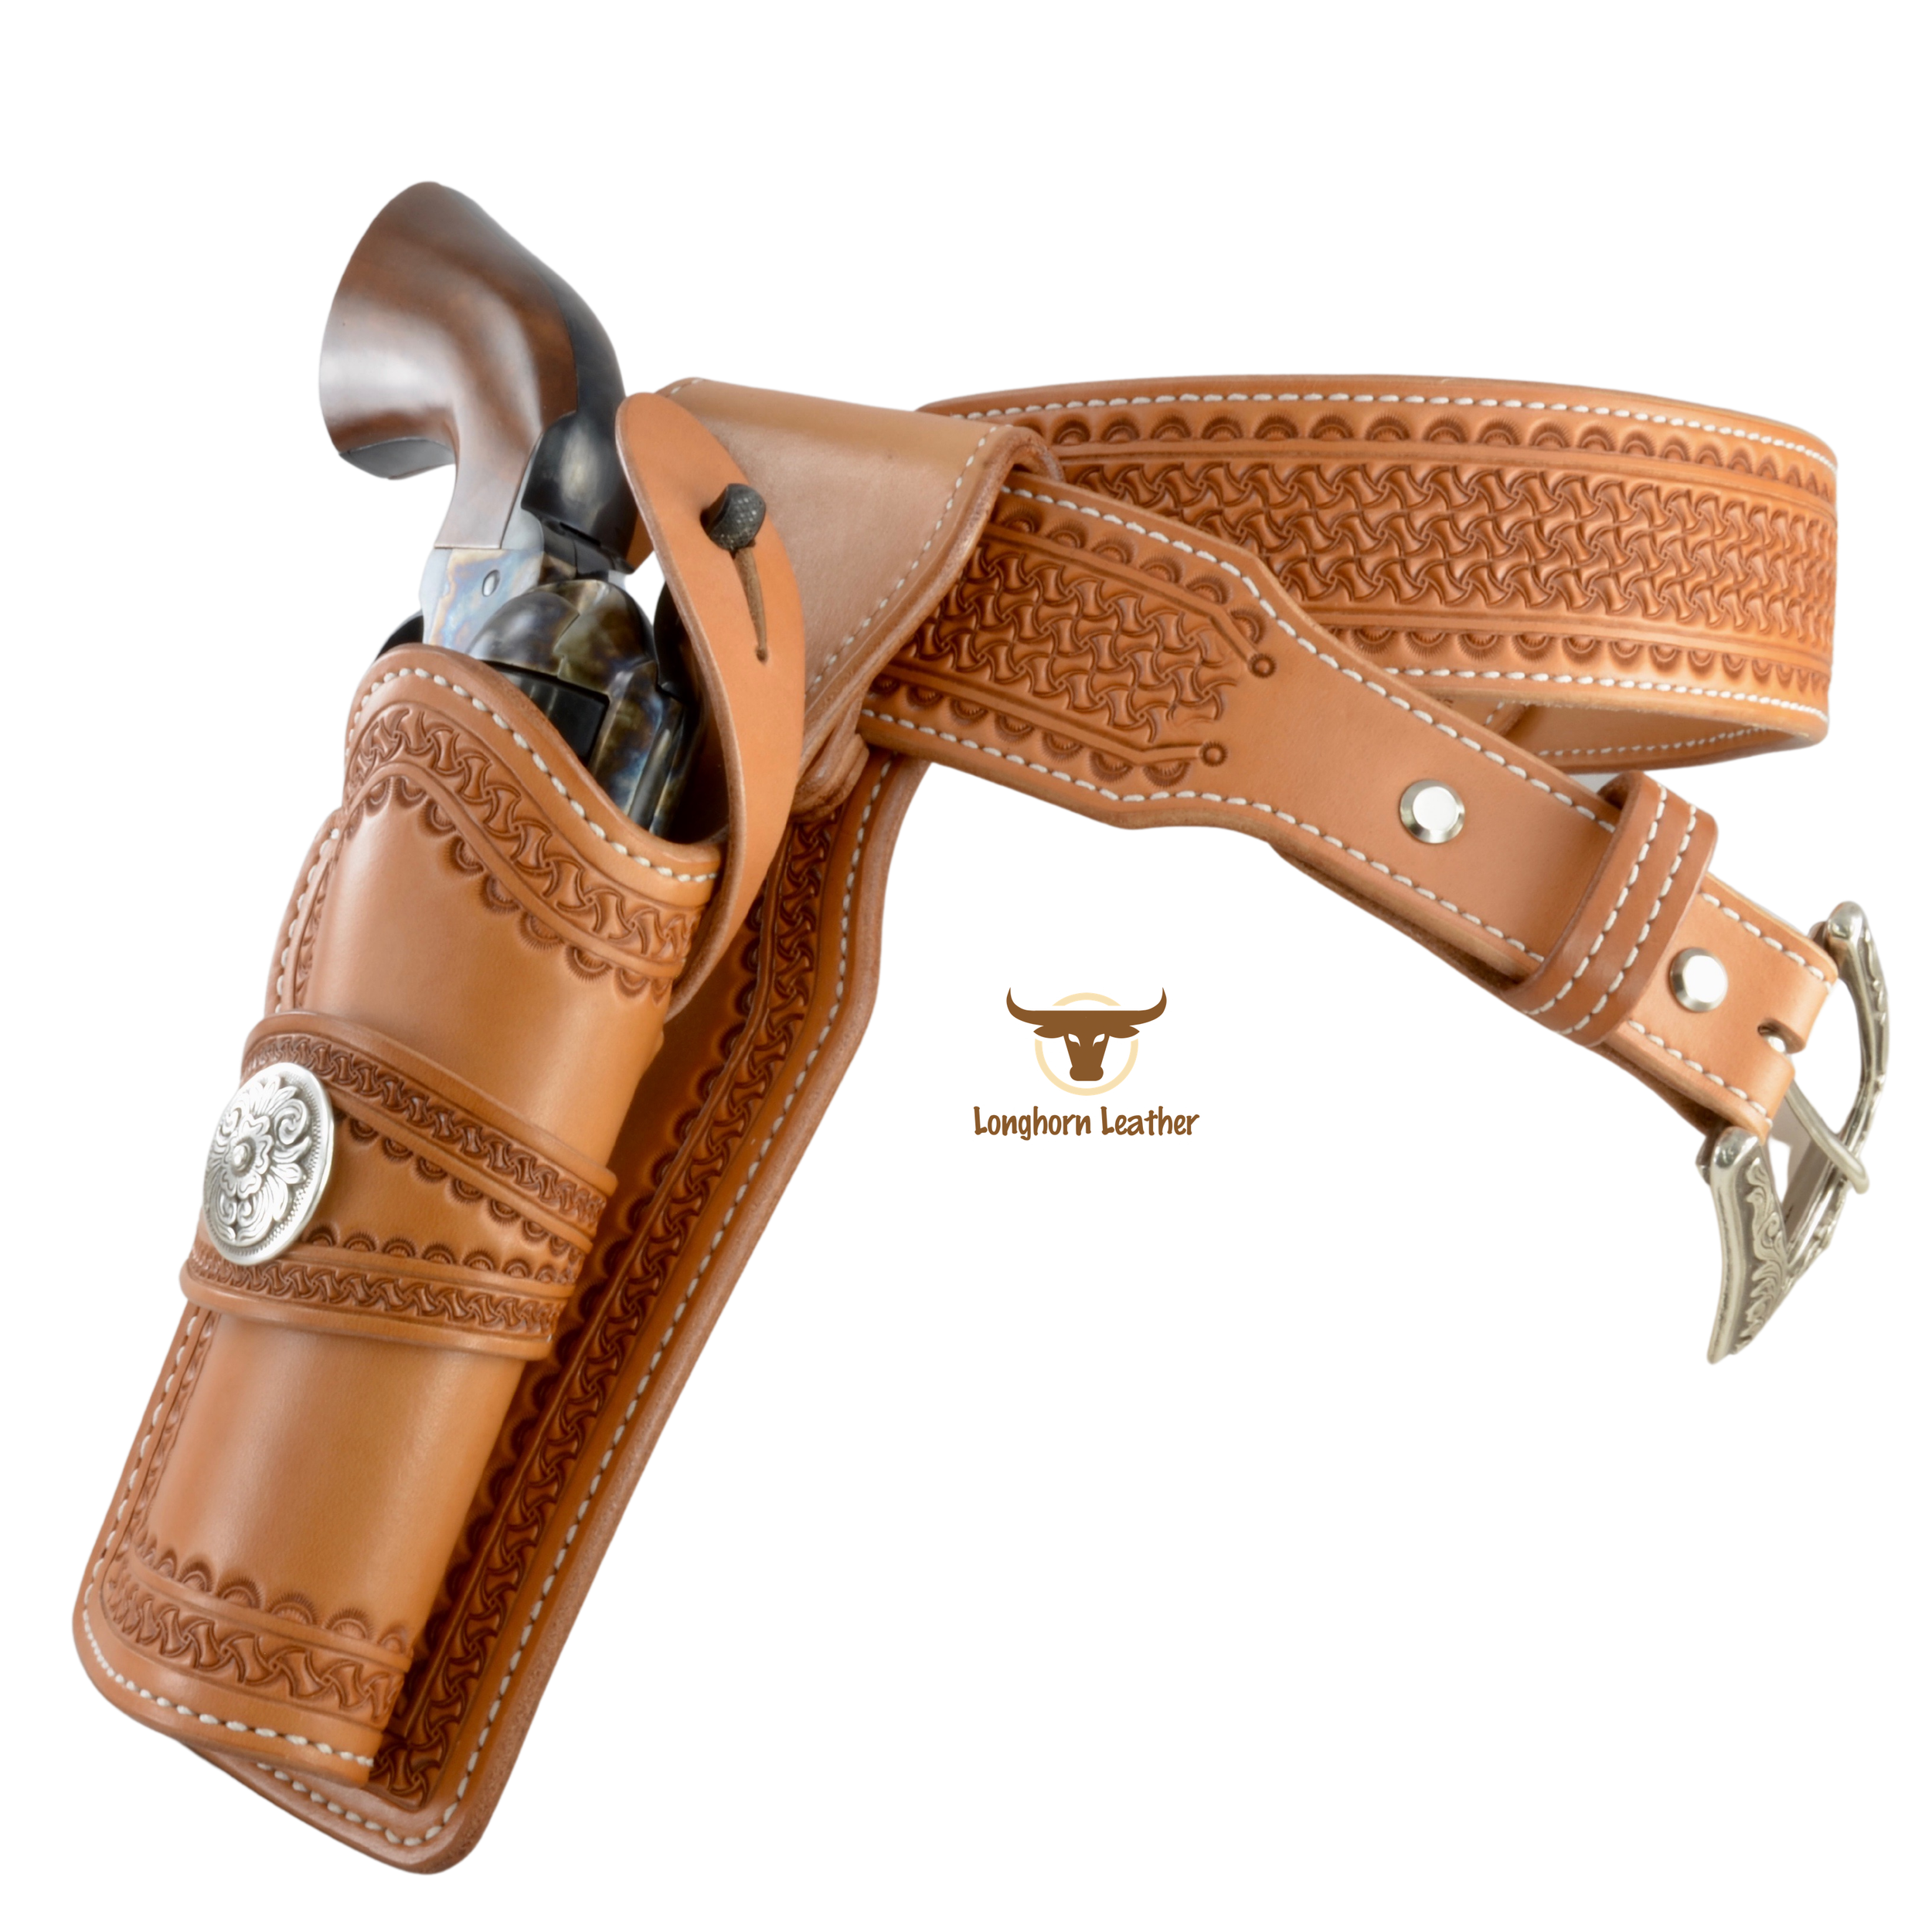 Custom leather single action holster and gun belt featuring the "Kingman" design.  Individually handcrafted at Longhorn Leather AZ.